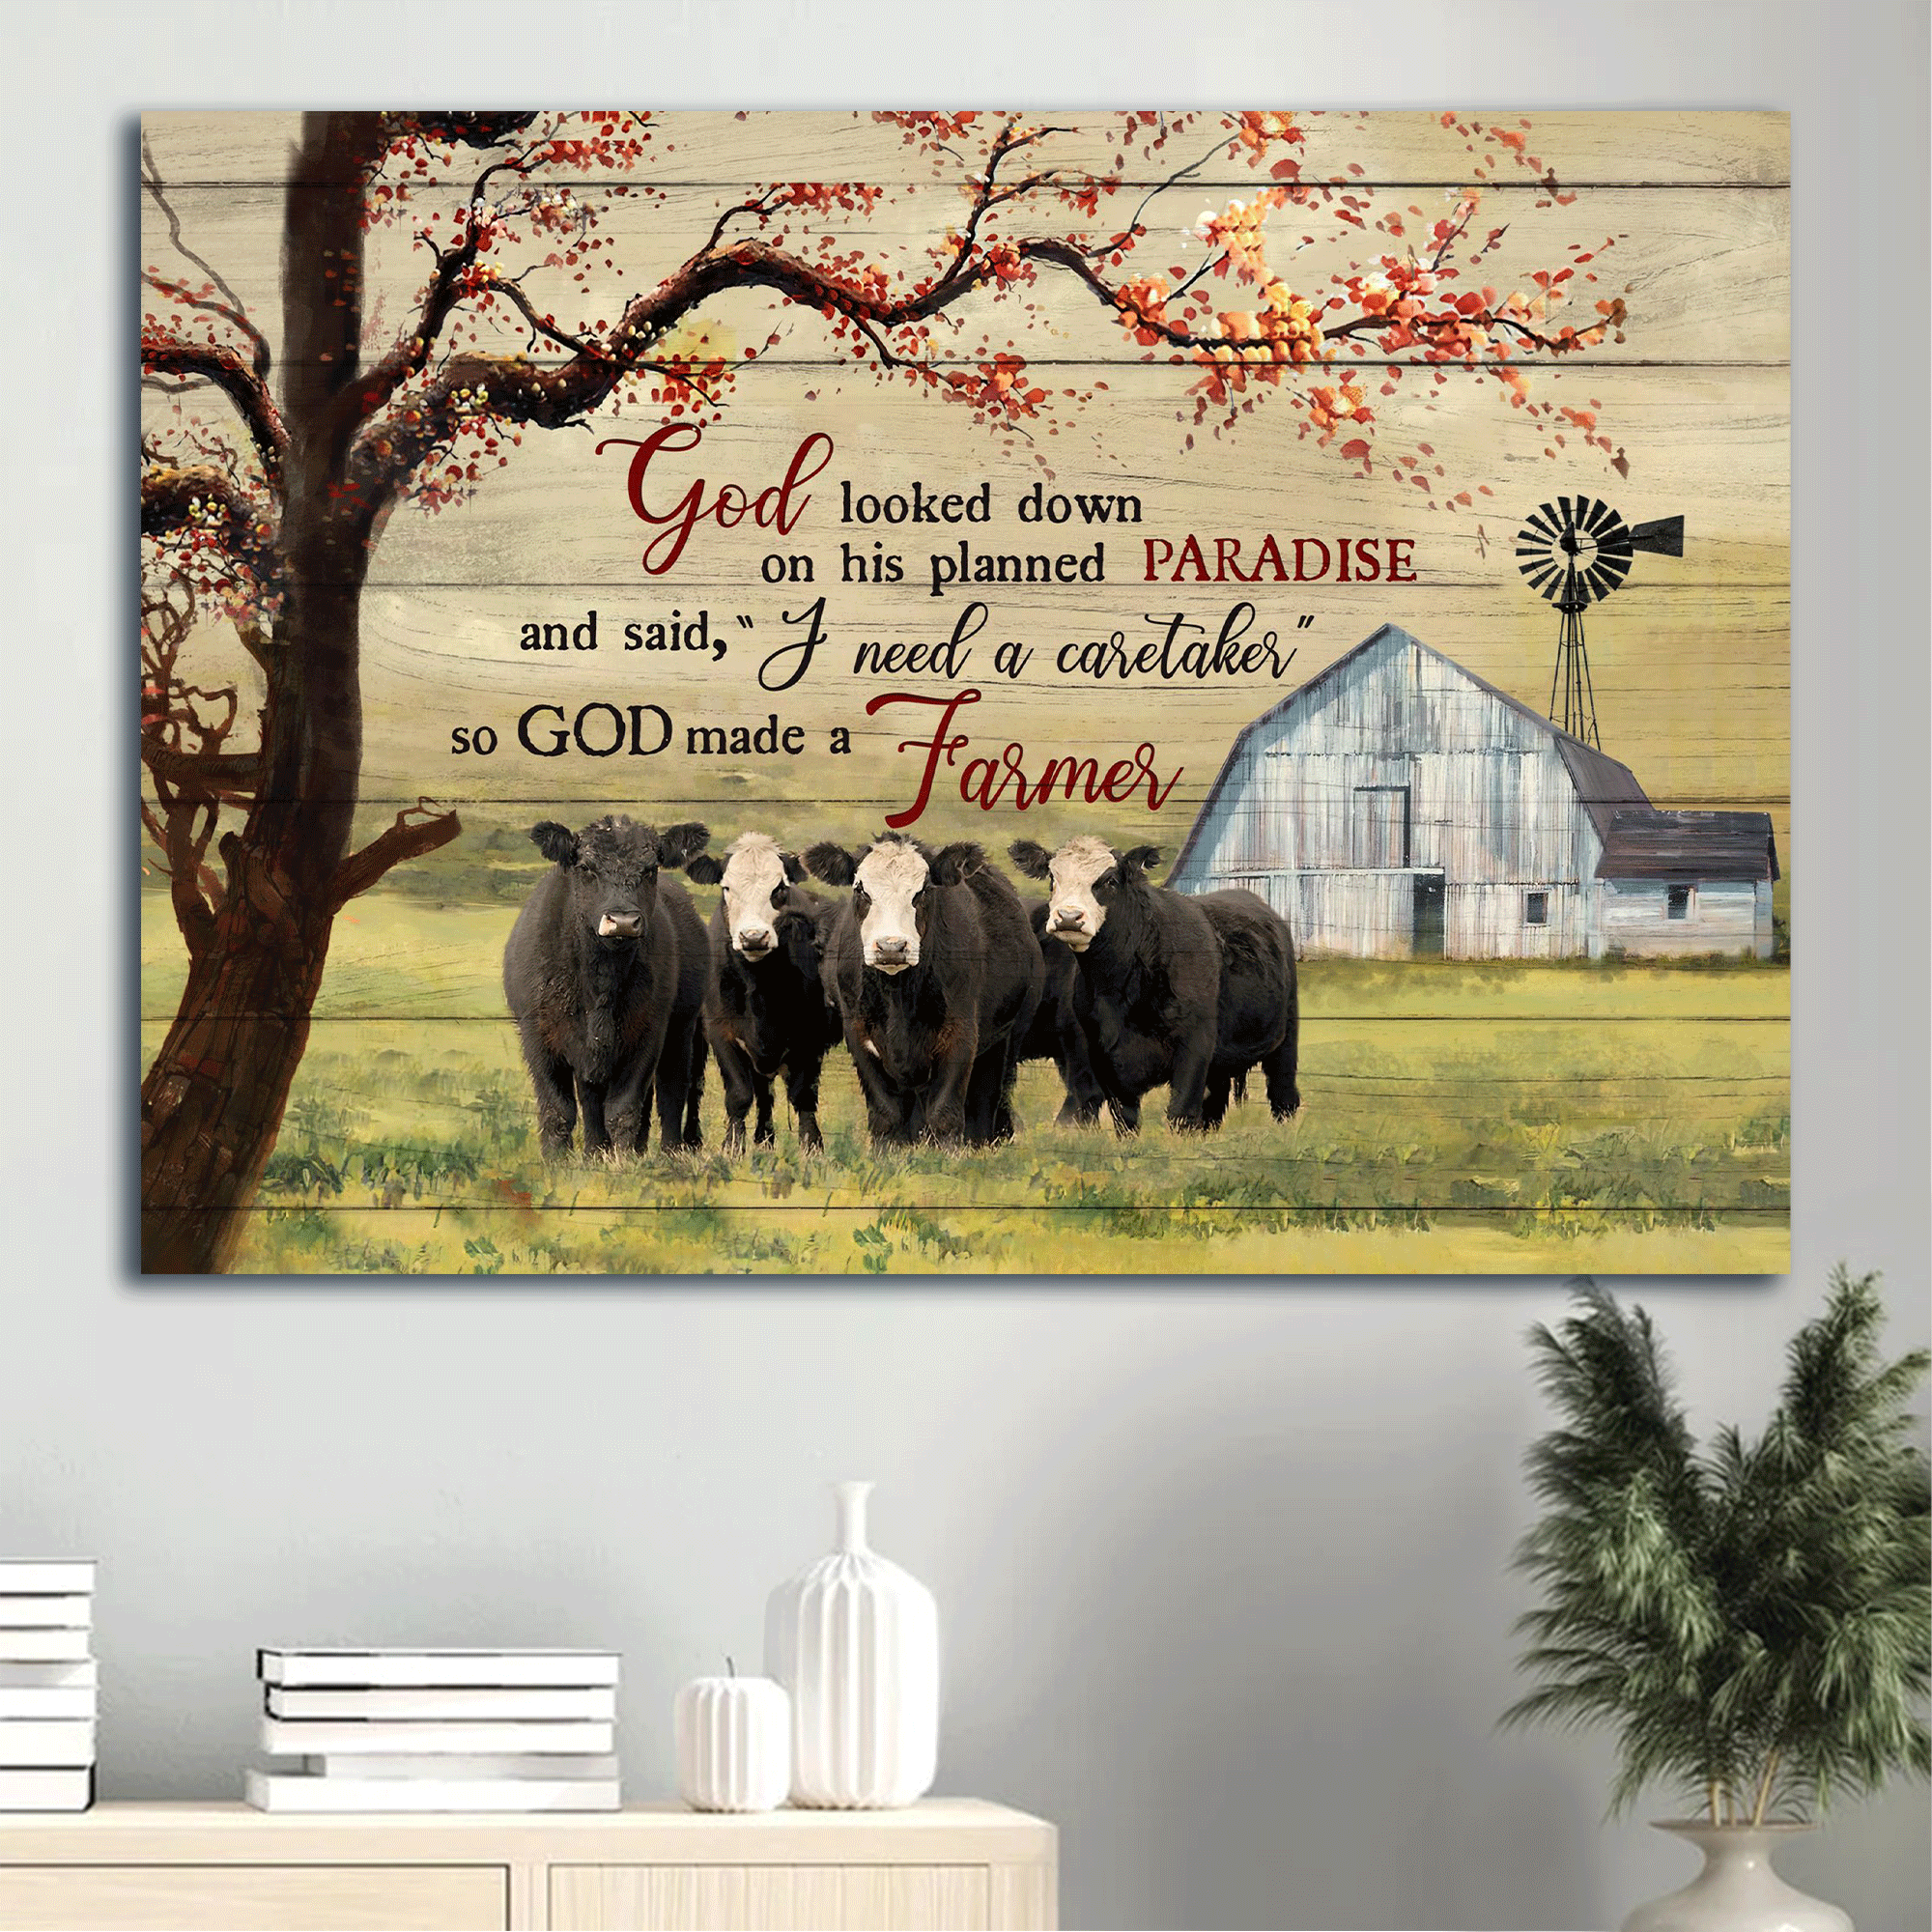 Jesus Landscape Canvas- Aberdeen Angus Canvas, Tranquil Farm, Under The Tree, Spring Grass Field Landscape Canvas- Gift For Religious Christian- God Looked Down On His Planned Paradise